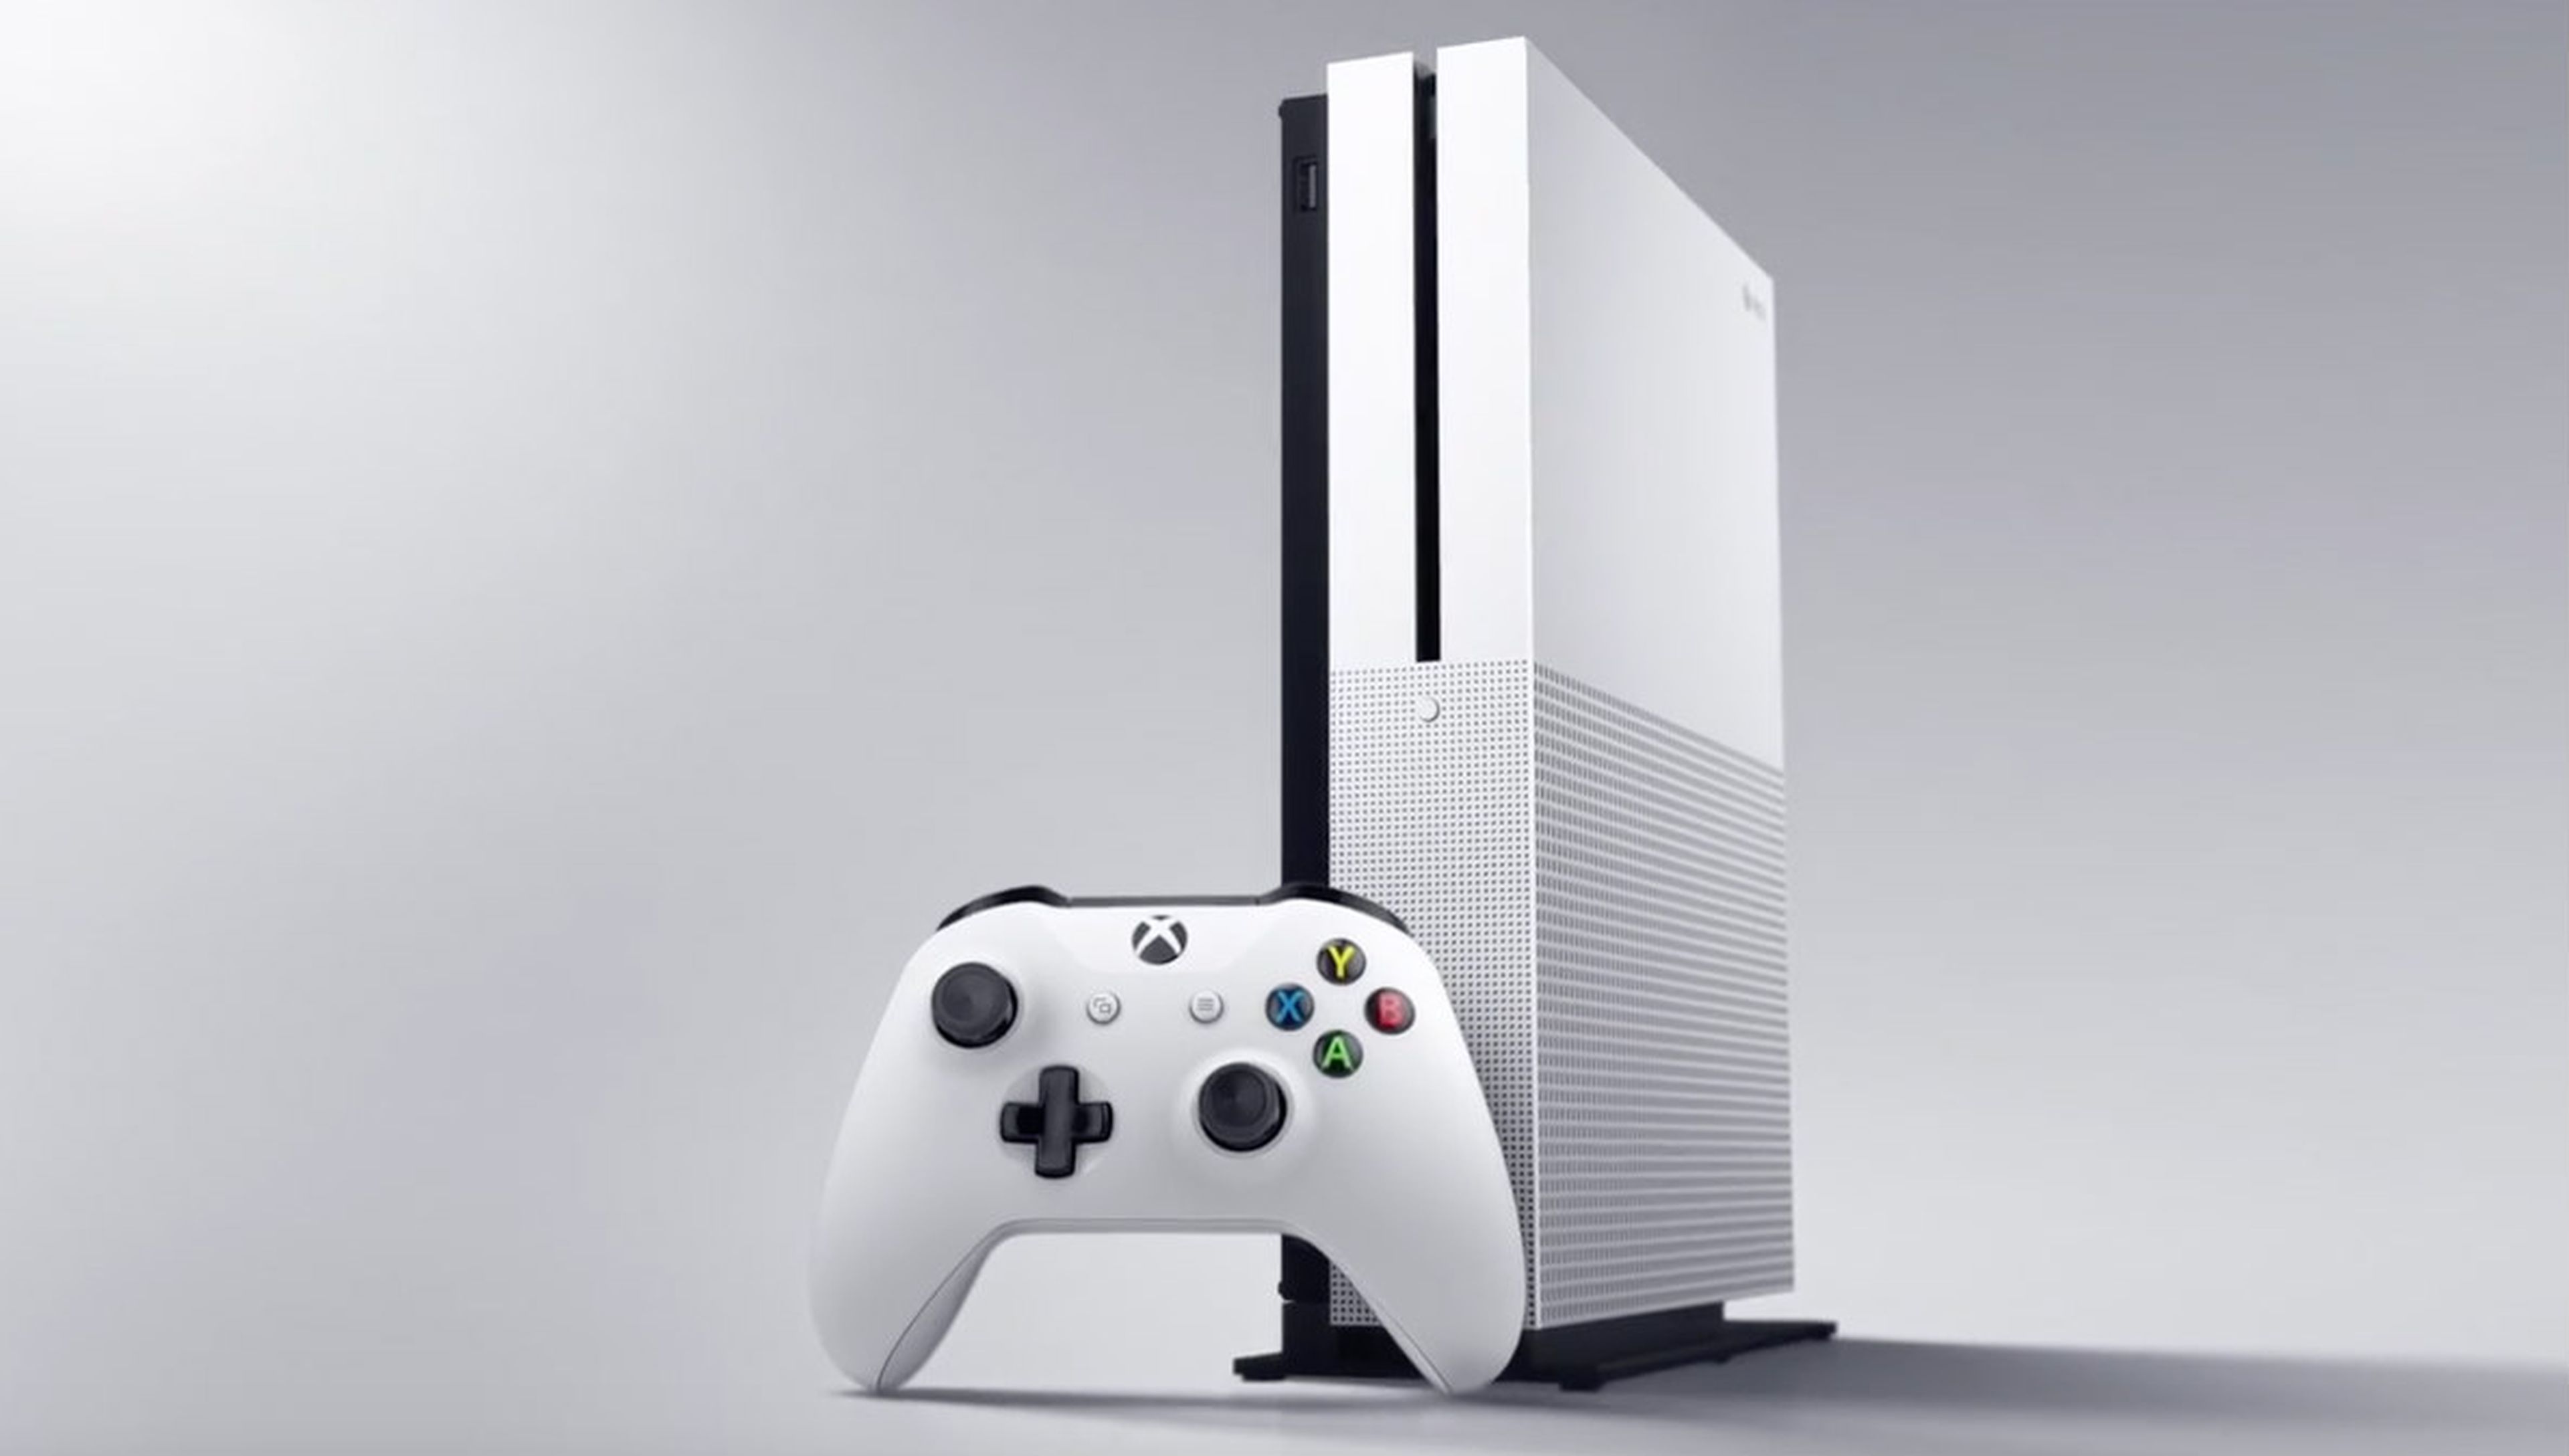 Xbox One S TV commercial